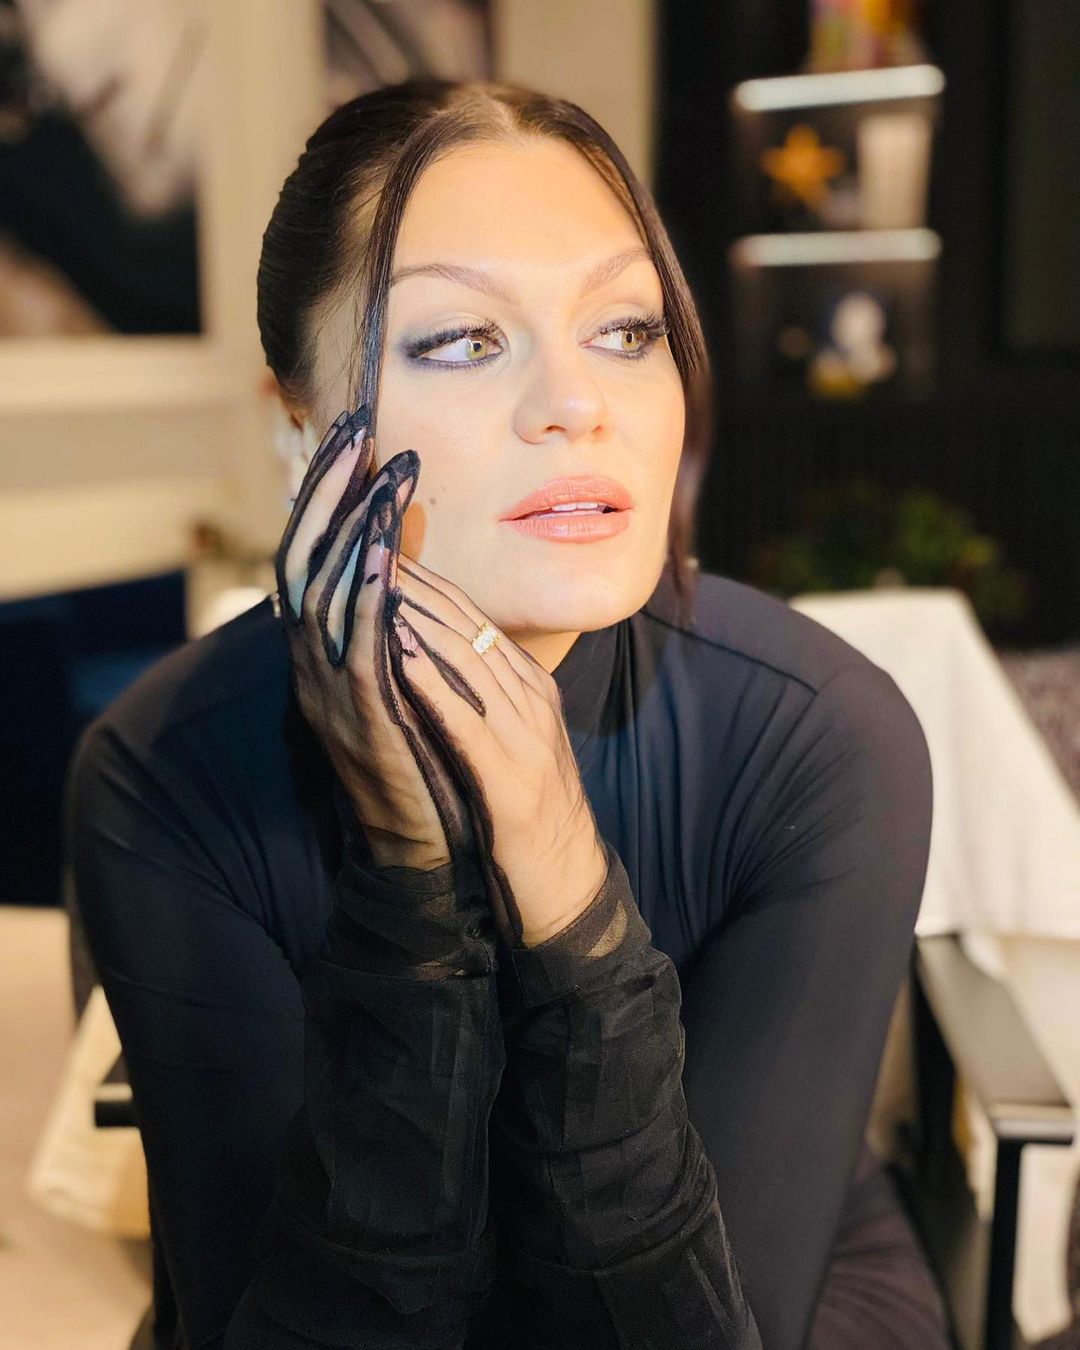 “The Sadness is Overwhelming, But I Know I am Strong” – Jessie J Opens Up about Having a Miscarriage